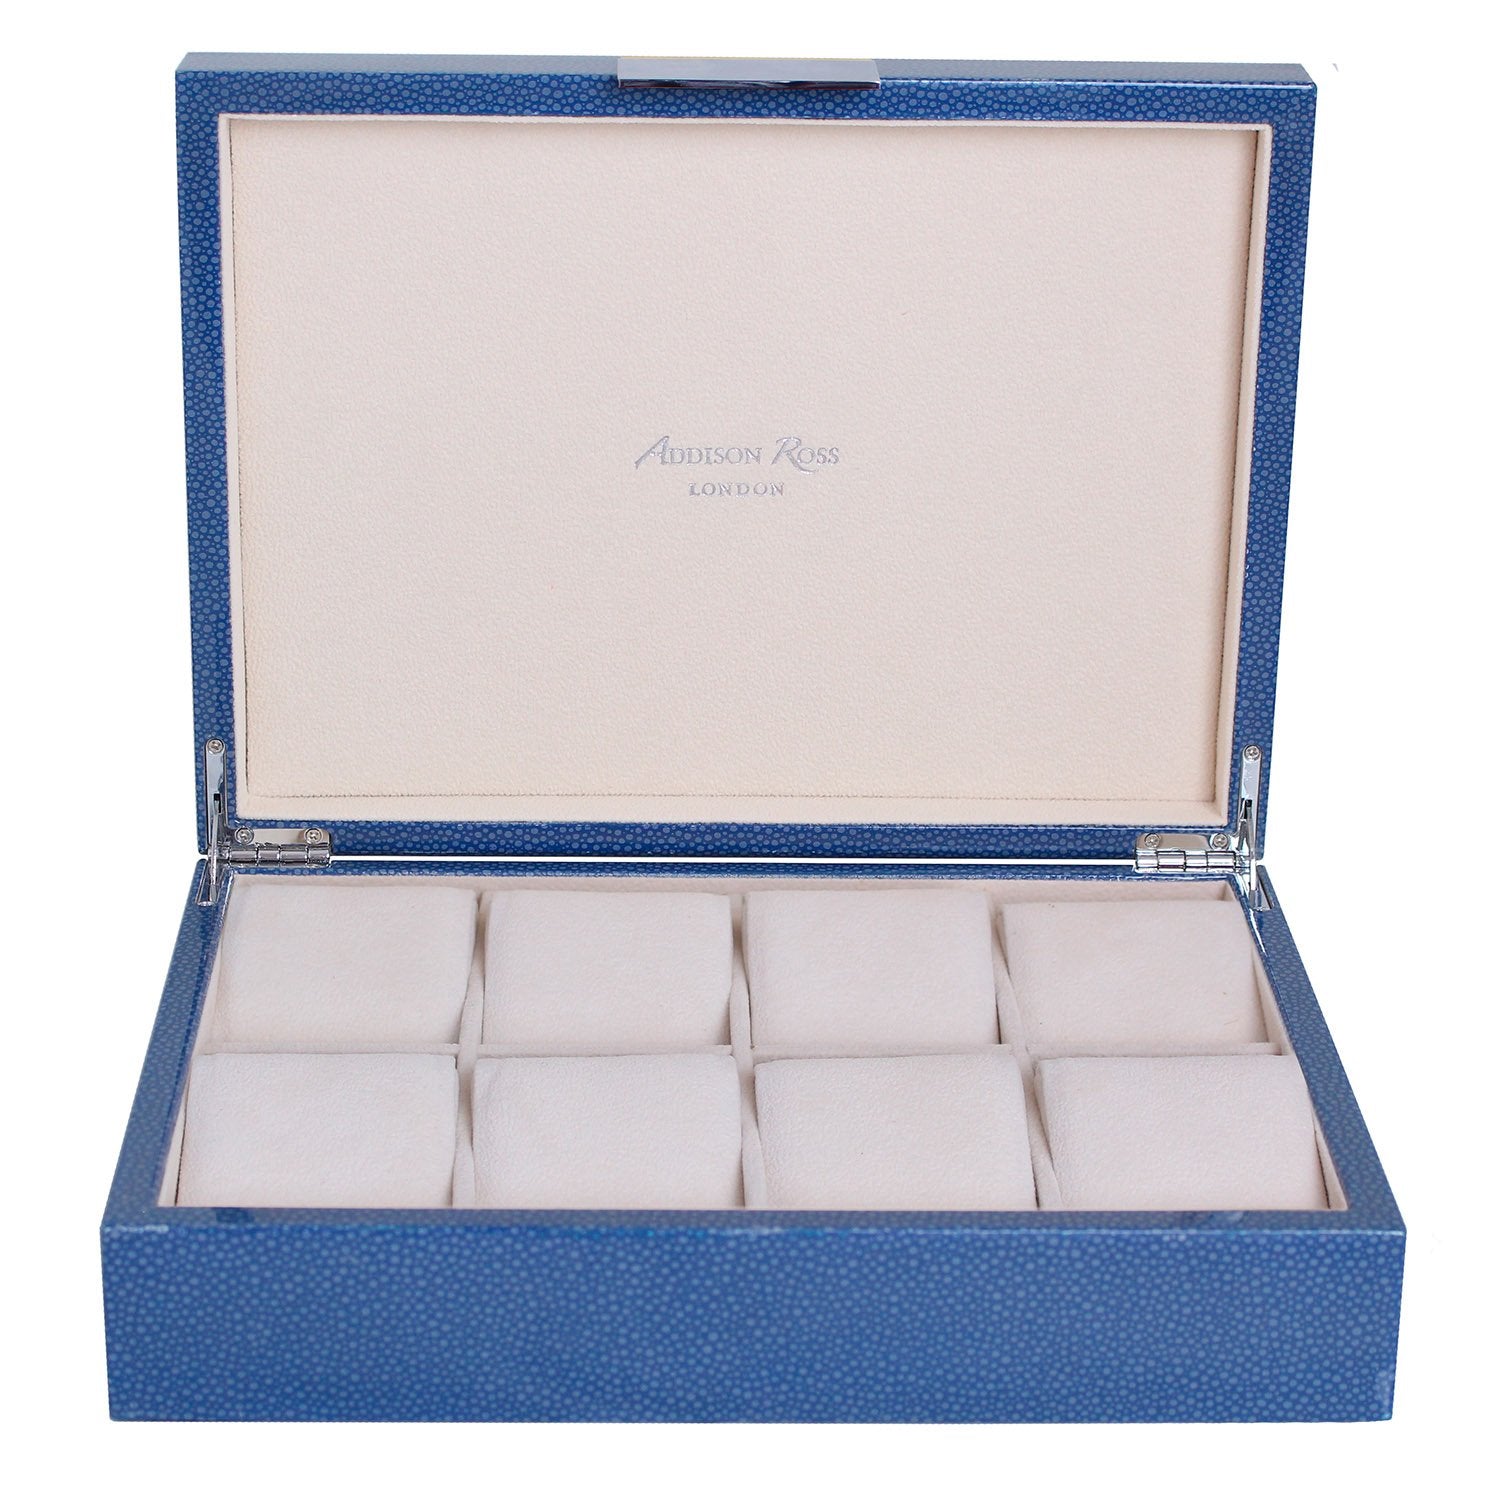 Large blue watch box with cream suede interior